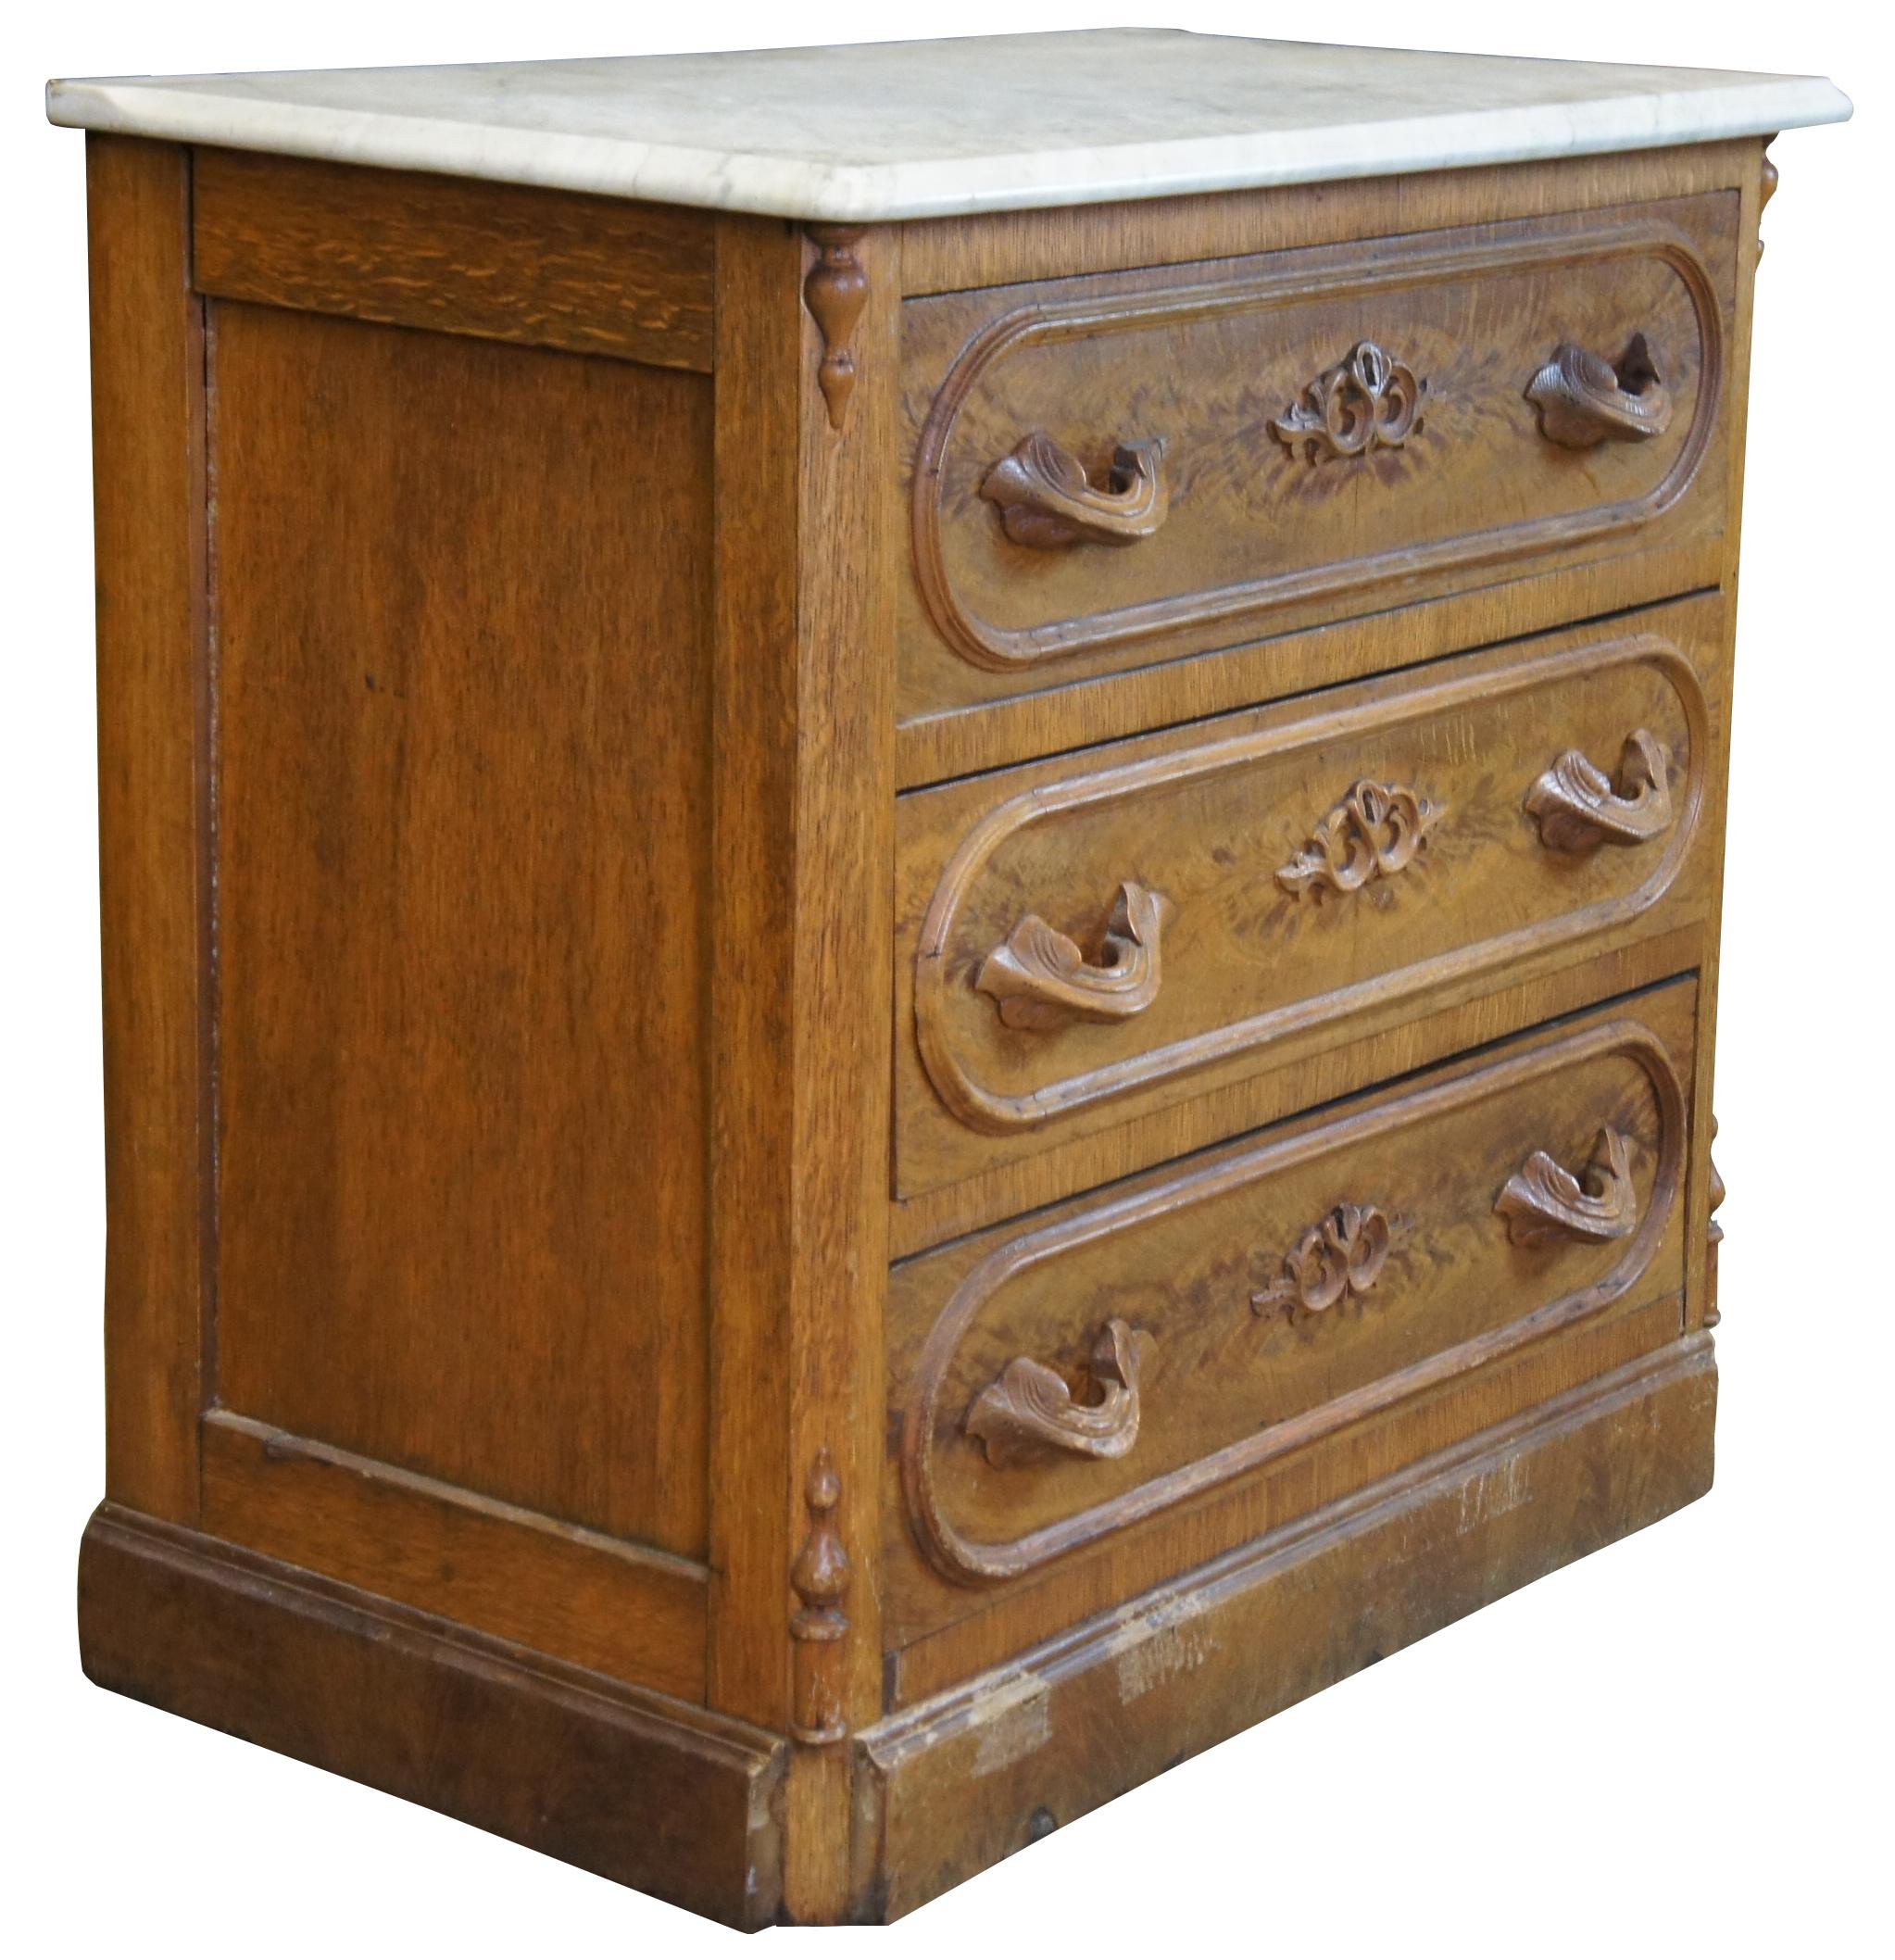 Antique Victorian marble top dresser. Made from quartersawn oak with walnut burled veneer front. Each drawer features an ornately carved key hole and hand carved drawer pulls centered between an oval molding. Includes marble top, spindled corners